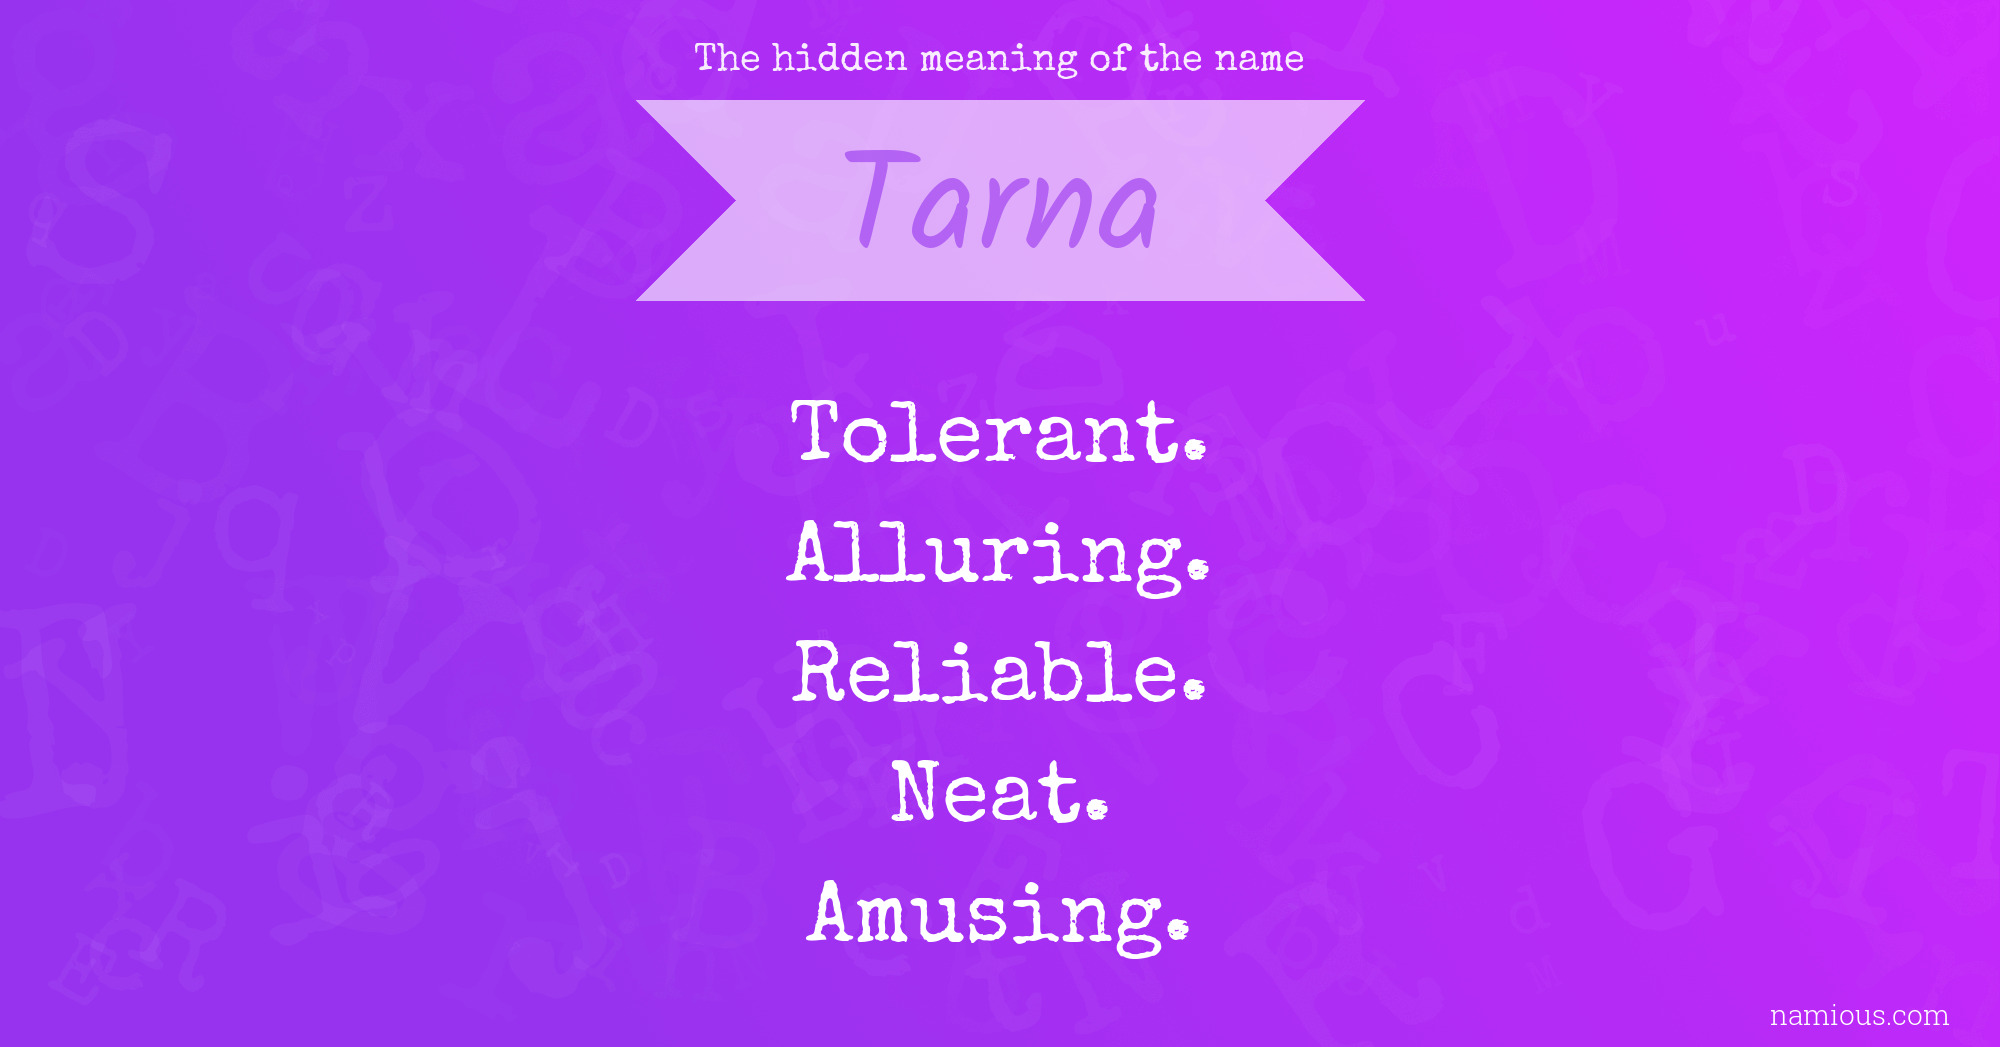 The hidden meaning of the name Tarna